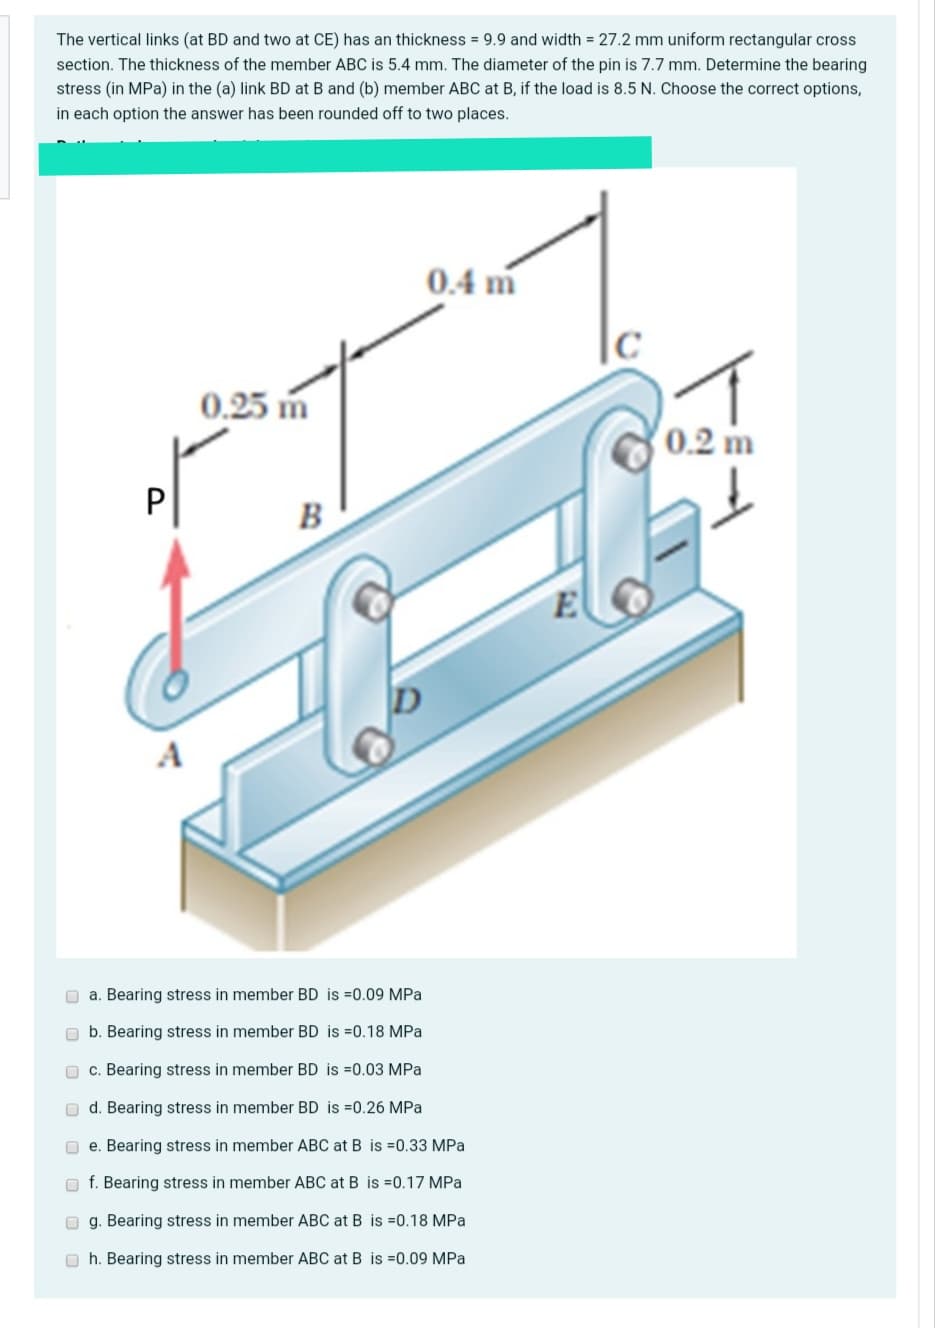 The vertical links (at BD and two at CE) has an thickness = 9.9 and width = 27.2 mm uniform rectangular cross
section. The thickness of the member ABC is 5.4 mm. The diameter of the pin is 7.7 mm. Determine the bearing
stress (in MPa) in the (a) link BD at B and (b) member ABC at B, if the load is 8.5 N. Choose the correct options,
in each option the answer has been rounded off to two places.
0.4 m
0.25 m
0.2 m
P
B
A
O a. Bearing stress in member BD is =0.09 MPa
O b. Bearing stress in member BD is =0.18 MPa
O c. Bearing stress in member BD is =0.03 MPa
O d. Bearing stress in member BD is =0.26 MPa
O e. Bearing stress in member ABC at B is =0.33 MPa
f. Bearing stress in member ABC at B is =0.17 MPa
O g. Bearing stress in member ABC at B is =0.18 MPa
O h. Bearing stress in member ABC at B is =0.09 MPa
